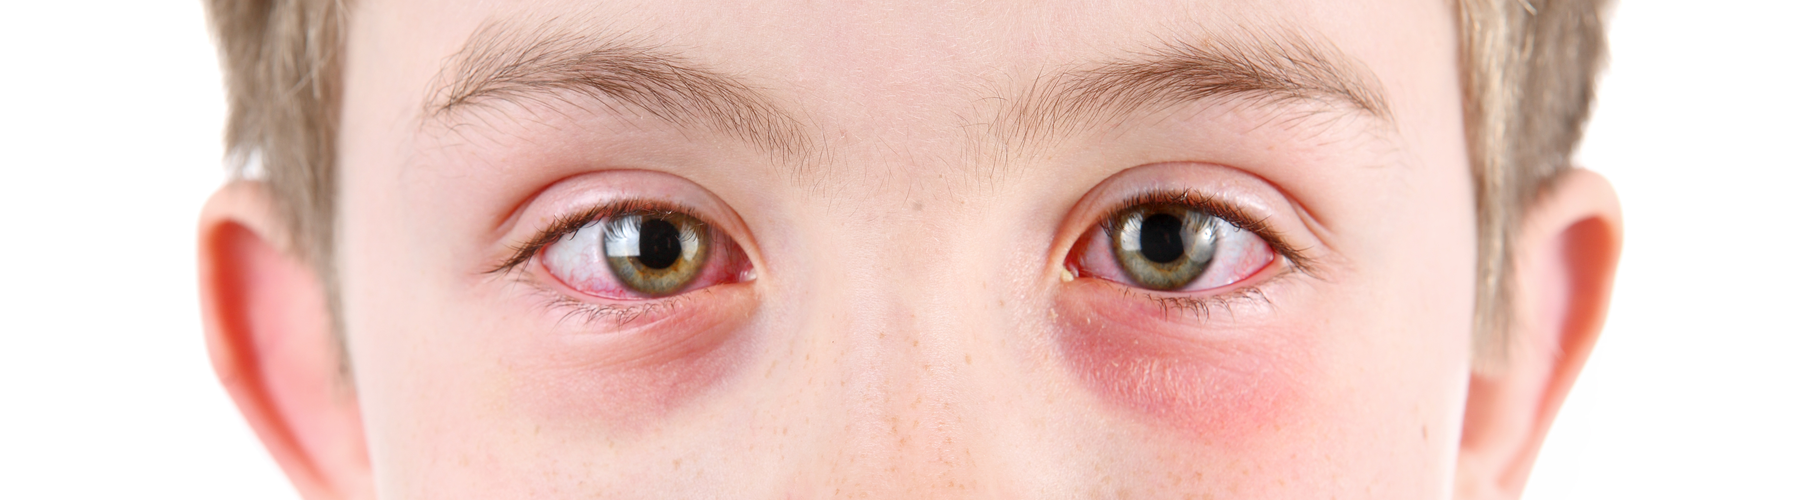 Young boy with an eye infection